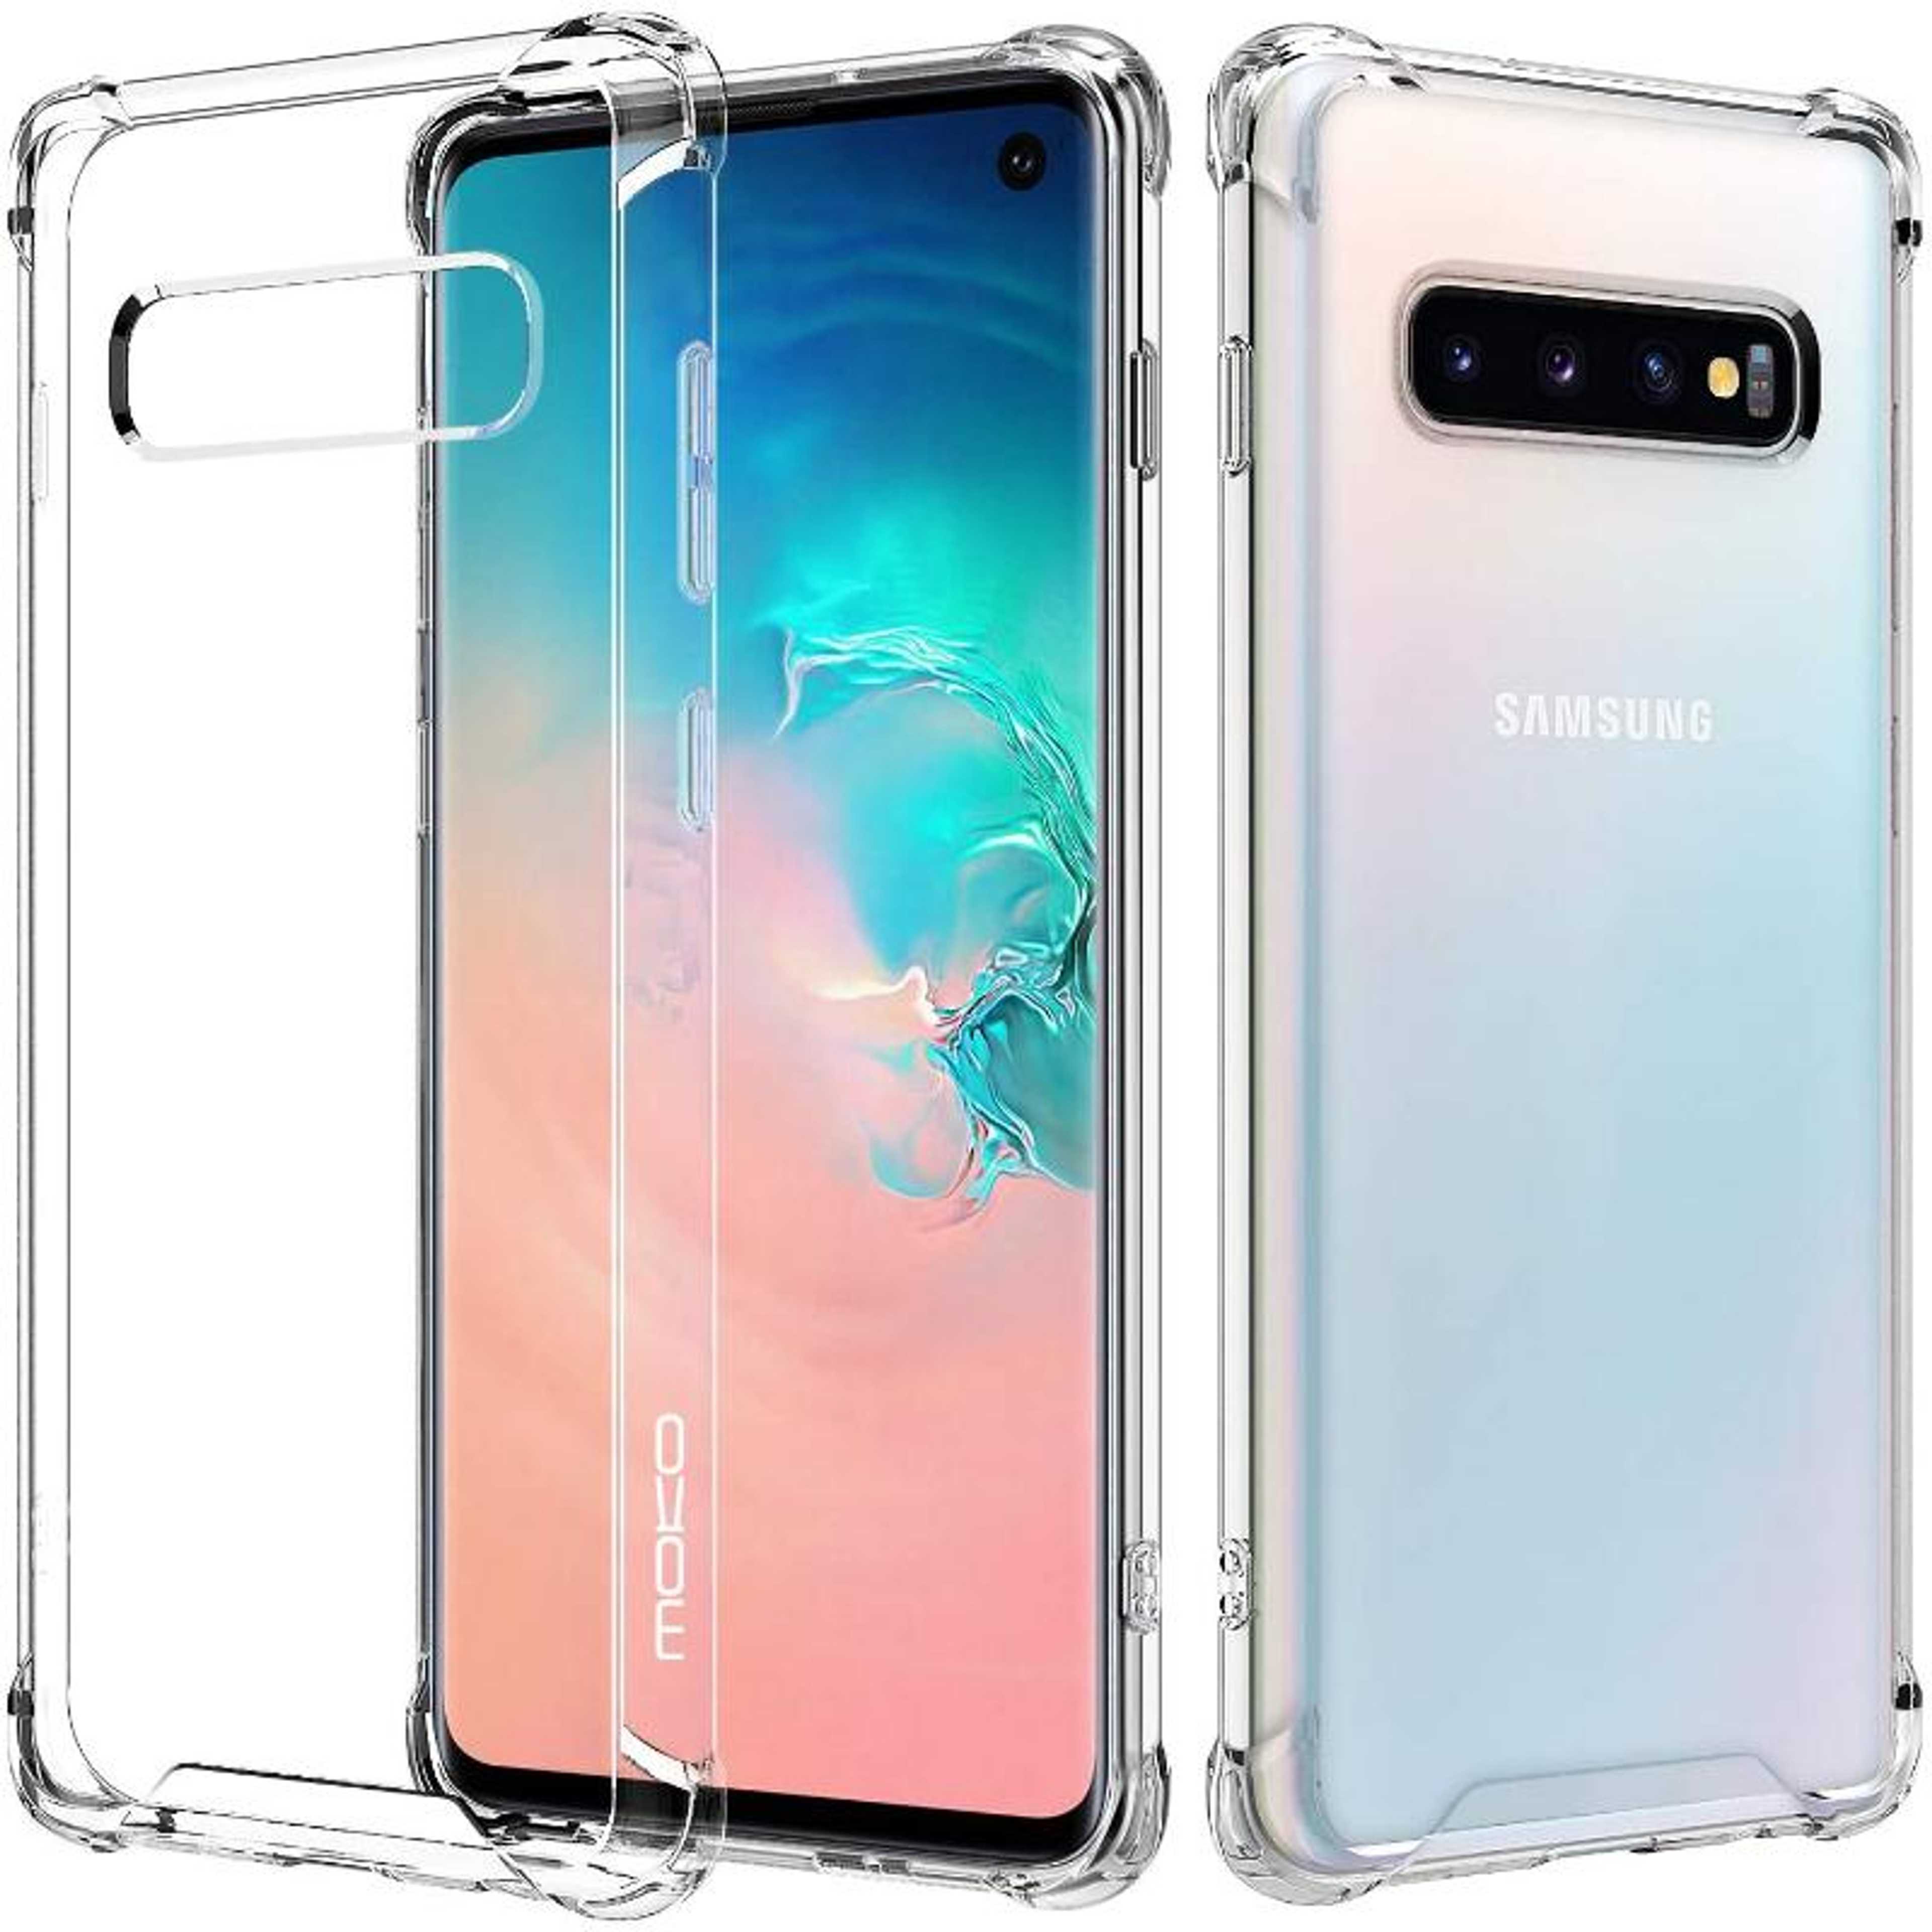 Samsung Galaxy S10 Plus - Dealcrest Anti Shock Transparent Four Corner Air Bag Shock Proof Bumper Back Case Cover High Quality Crystal Clear TPU Cover